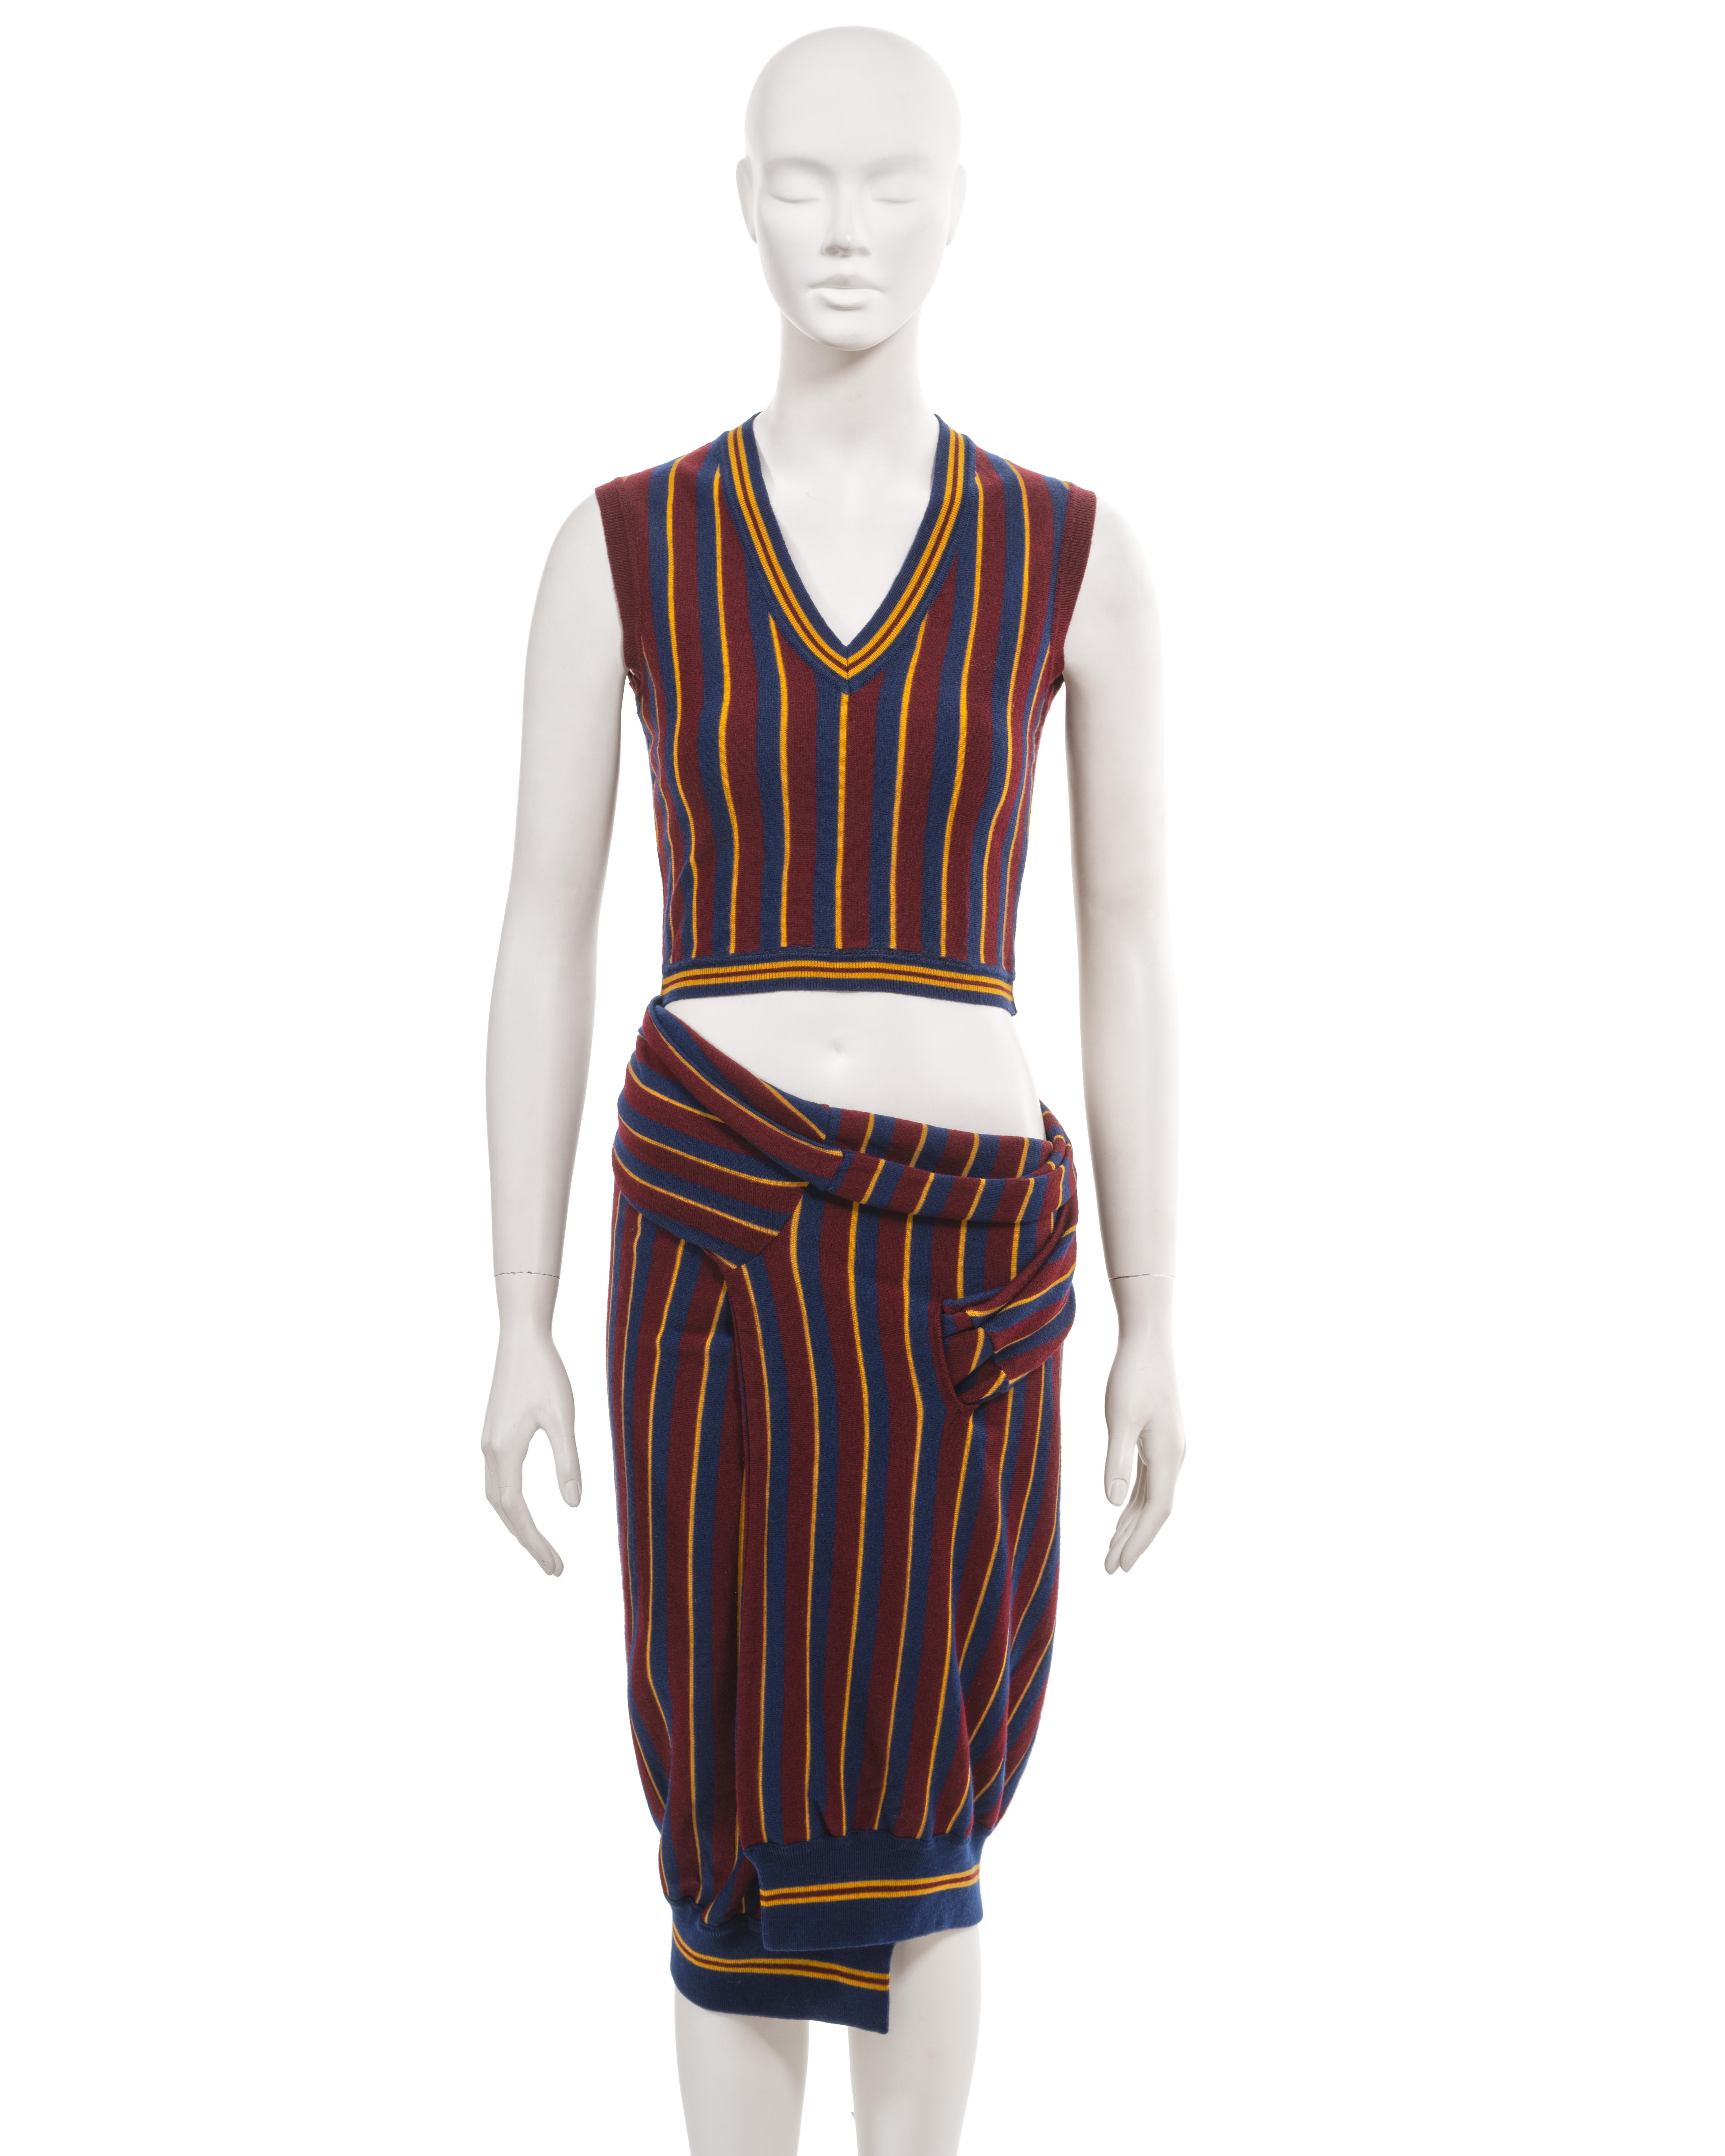 ▪ Archival John Galliano 2 piece set
▪ 'Suzy Sphinx' collection, Fall-Winter 1997
▪ Sold by One of a Kind Archive
▪ Burgundy wool jersey with woven navy and mustard stripes. Inspired by English school uniforms
▪ Ribbed wool jersey trim with